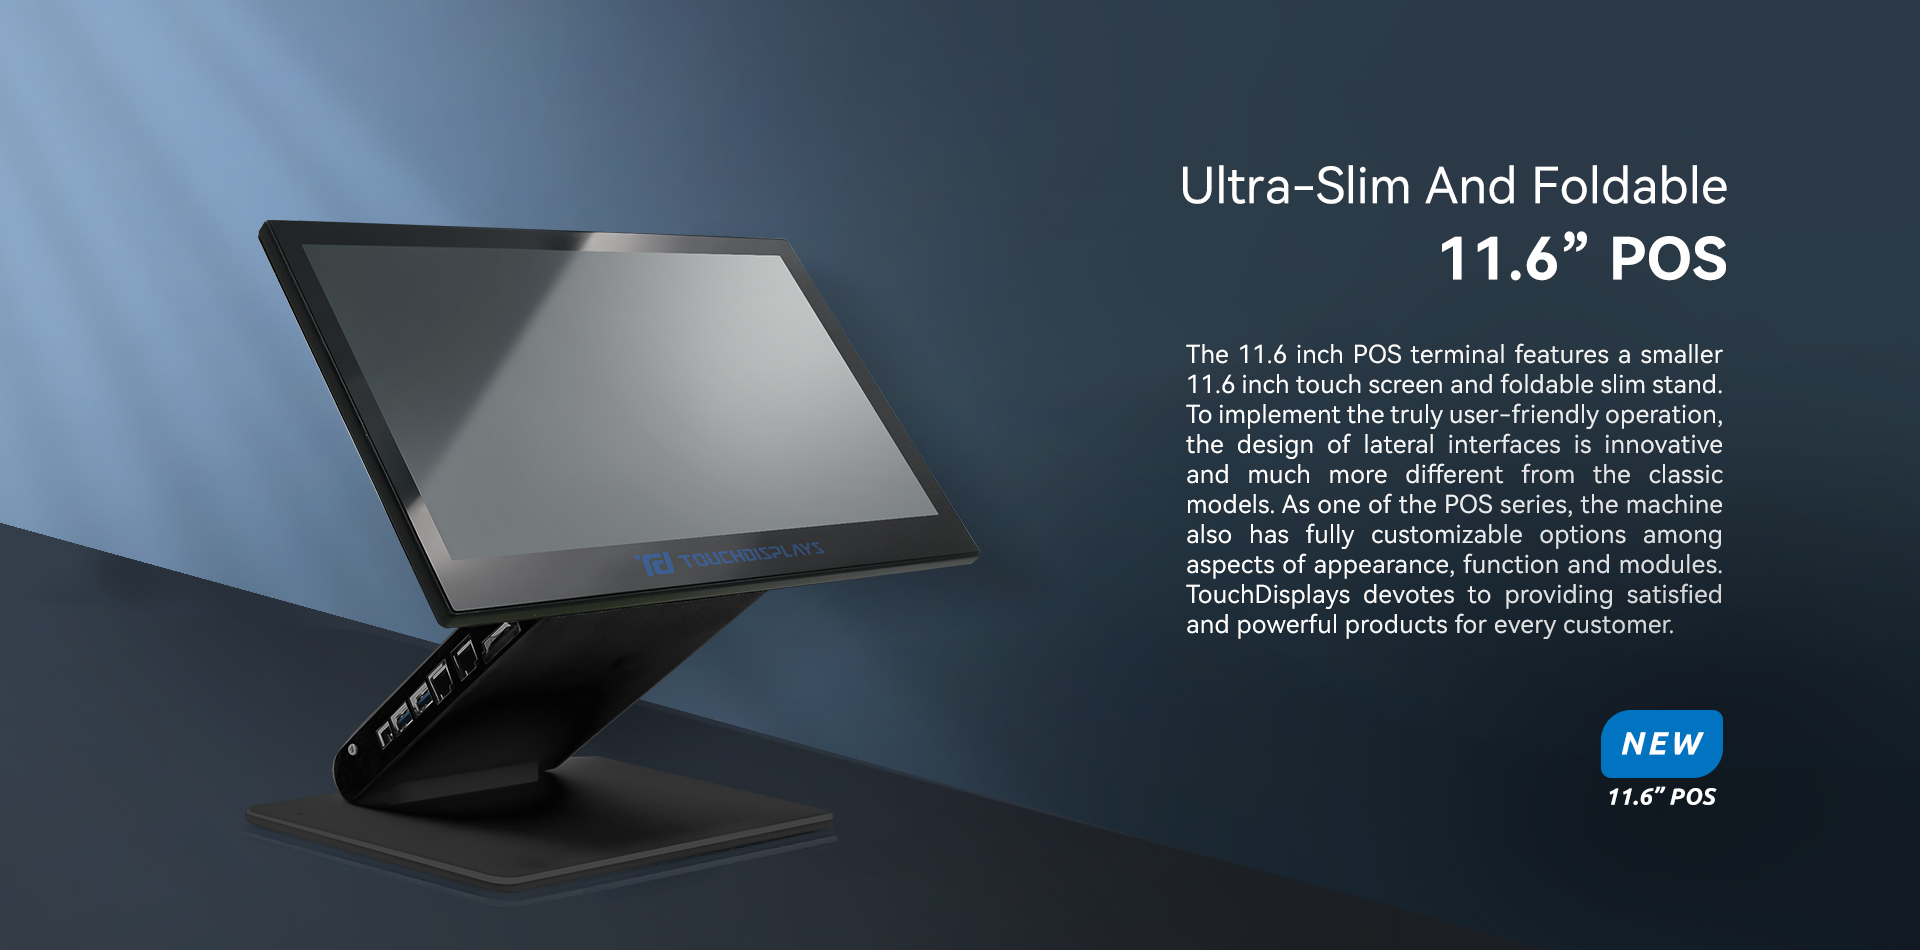 New Product Coming Soon – Ultra-slim and foldable 11.6″ POS